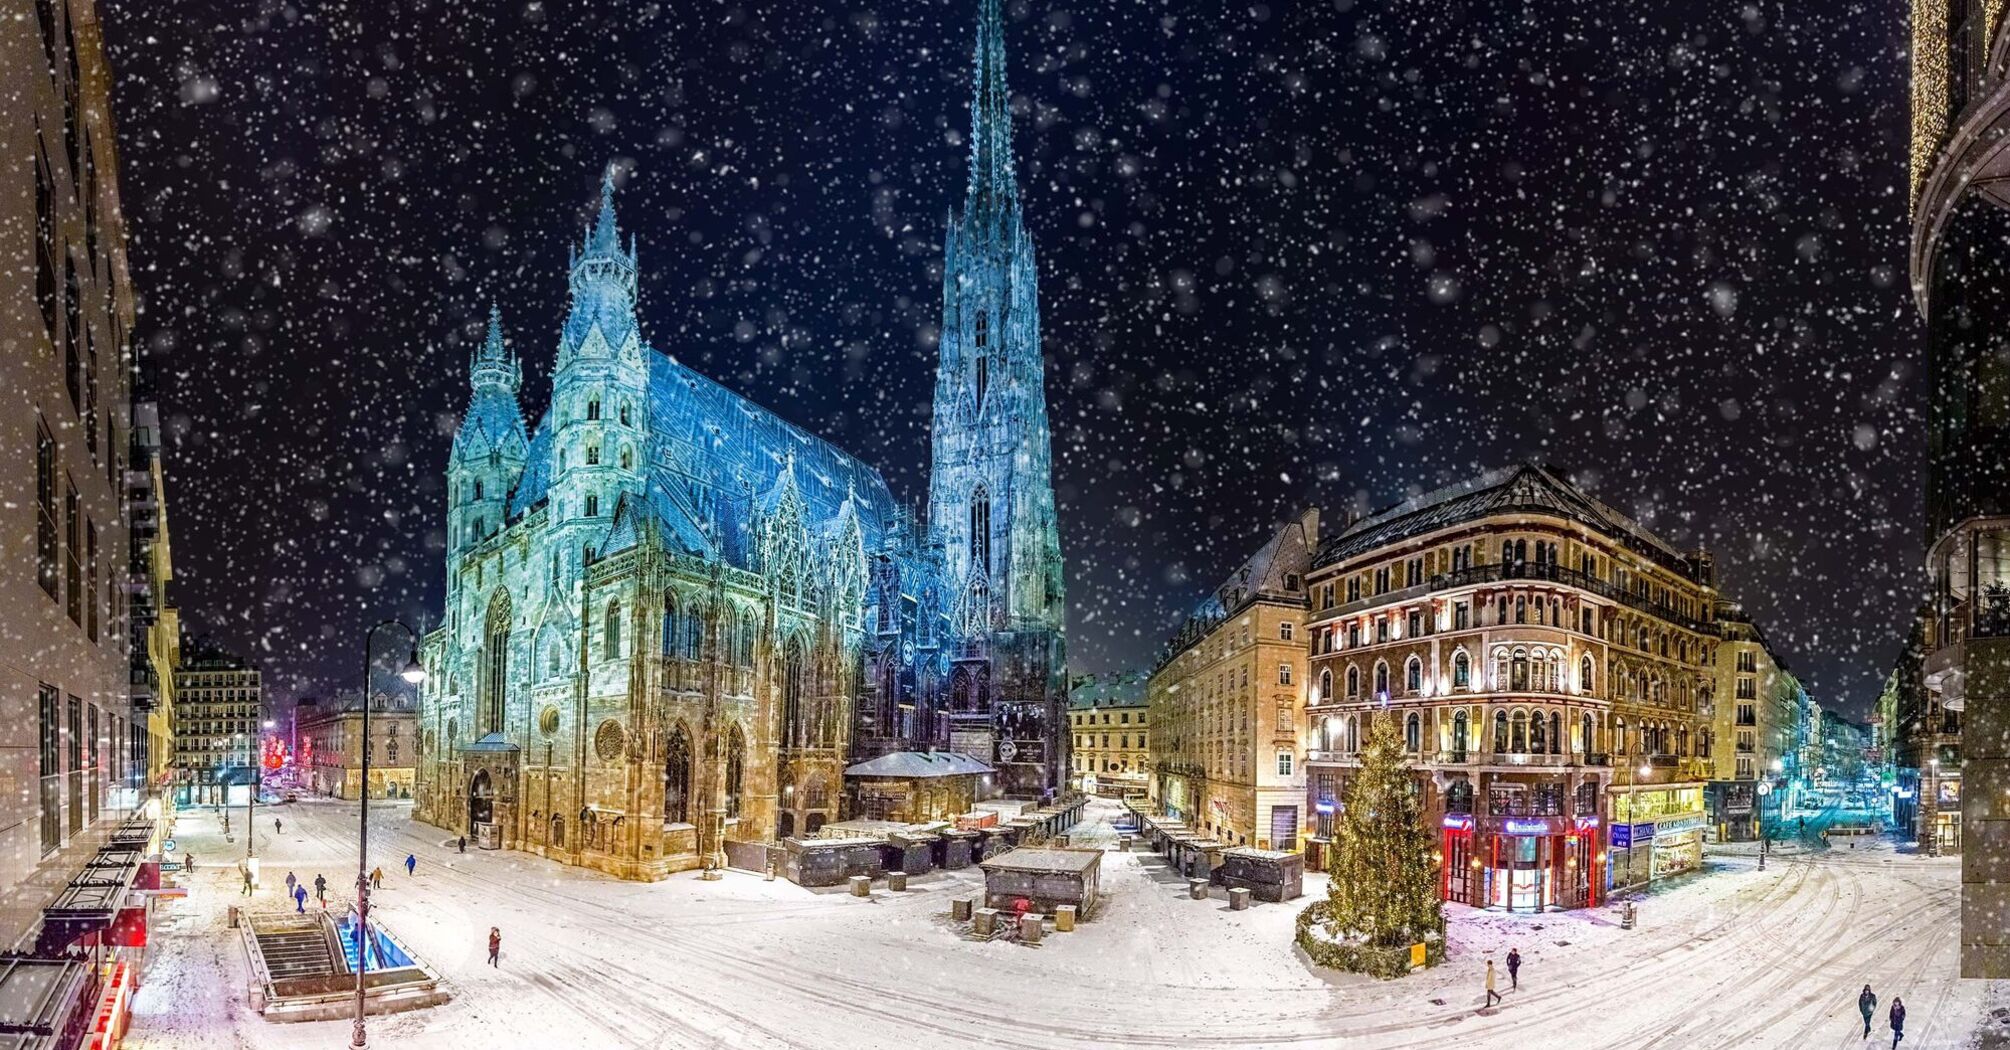 Snow-covered streets of Vienna at night with the illuminated St. Stephen's Cathedral and surrounding buildings